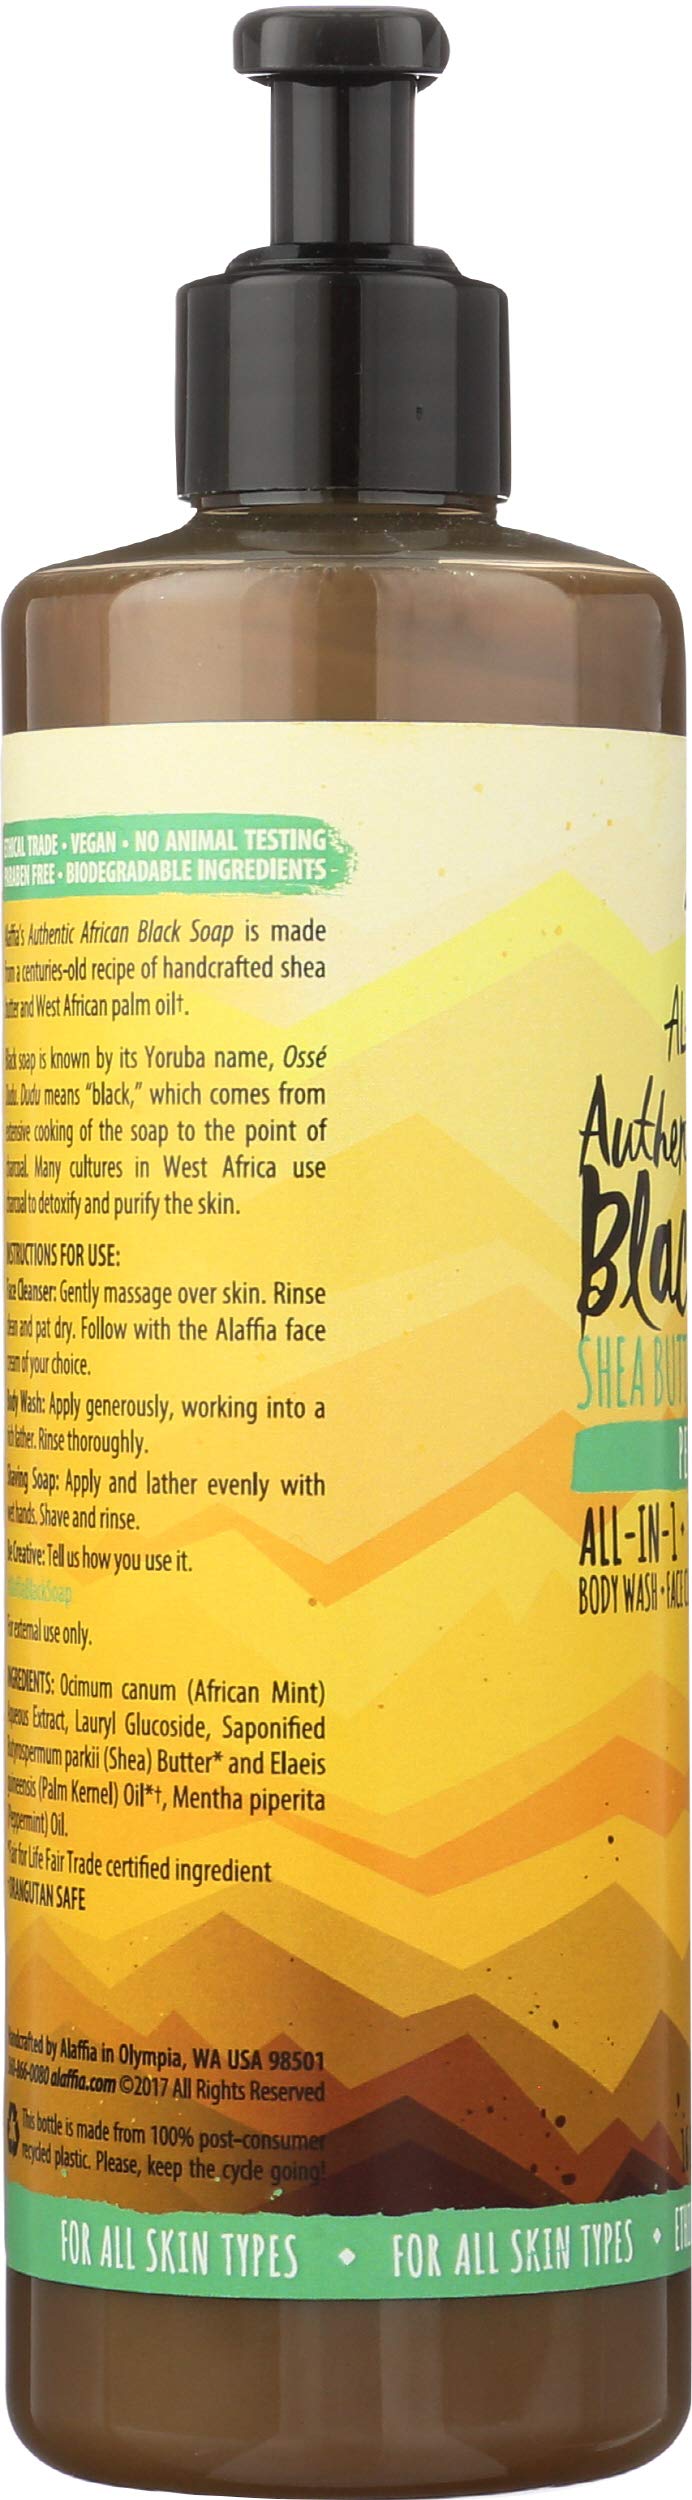 Alaffia - Authentic African Black Soap, All-in-One Body Wash, Shampoo, and Shaving Soap For All Skin and Hair Types, Fair Trade, No Parabens, Non-GMO, No SLS, Peppermint, 16 Ounce